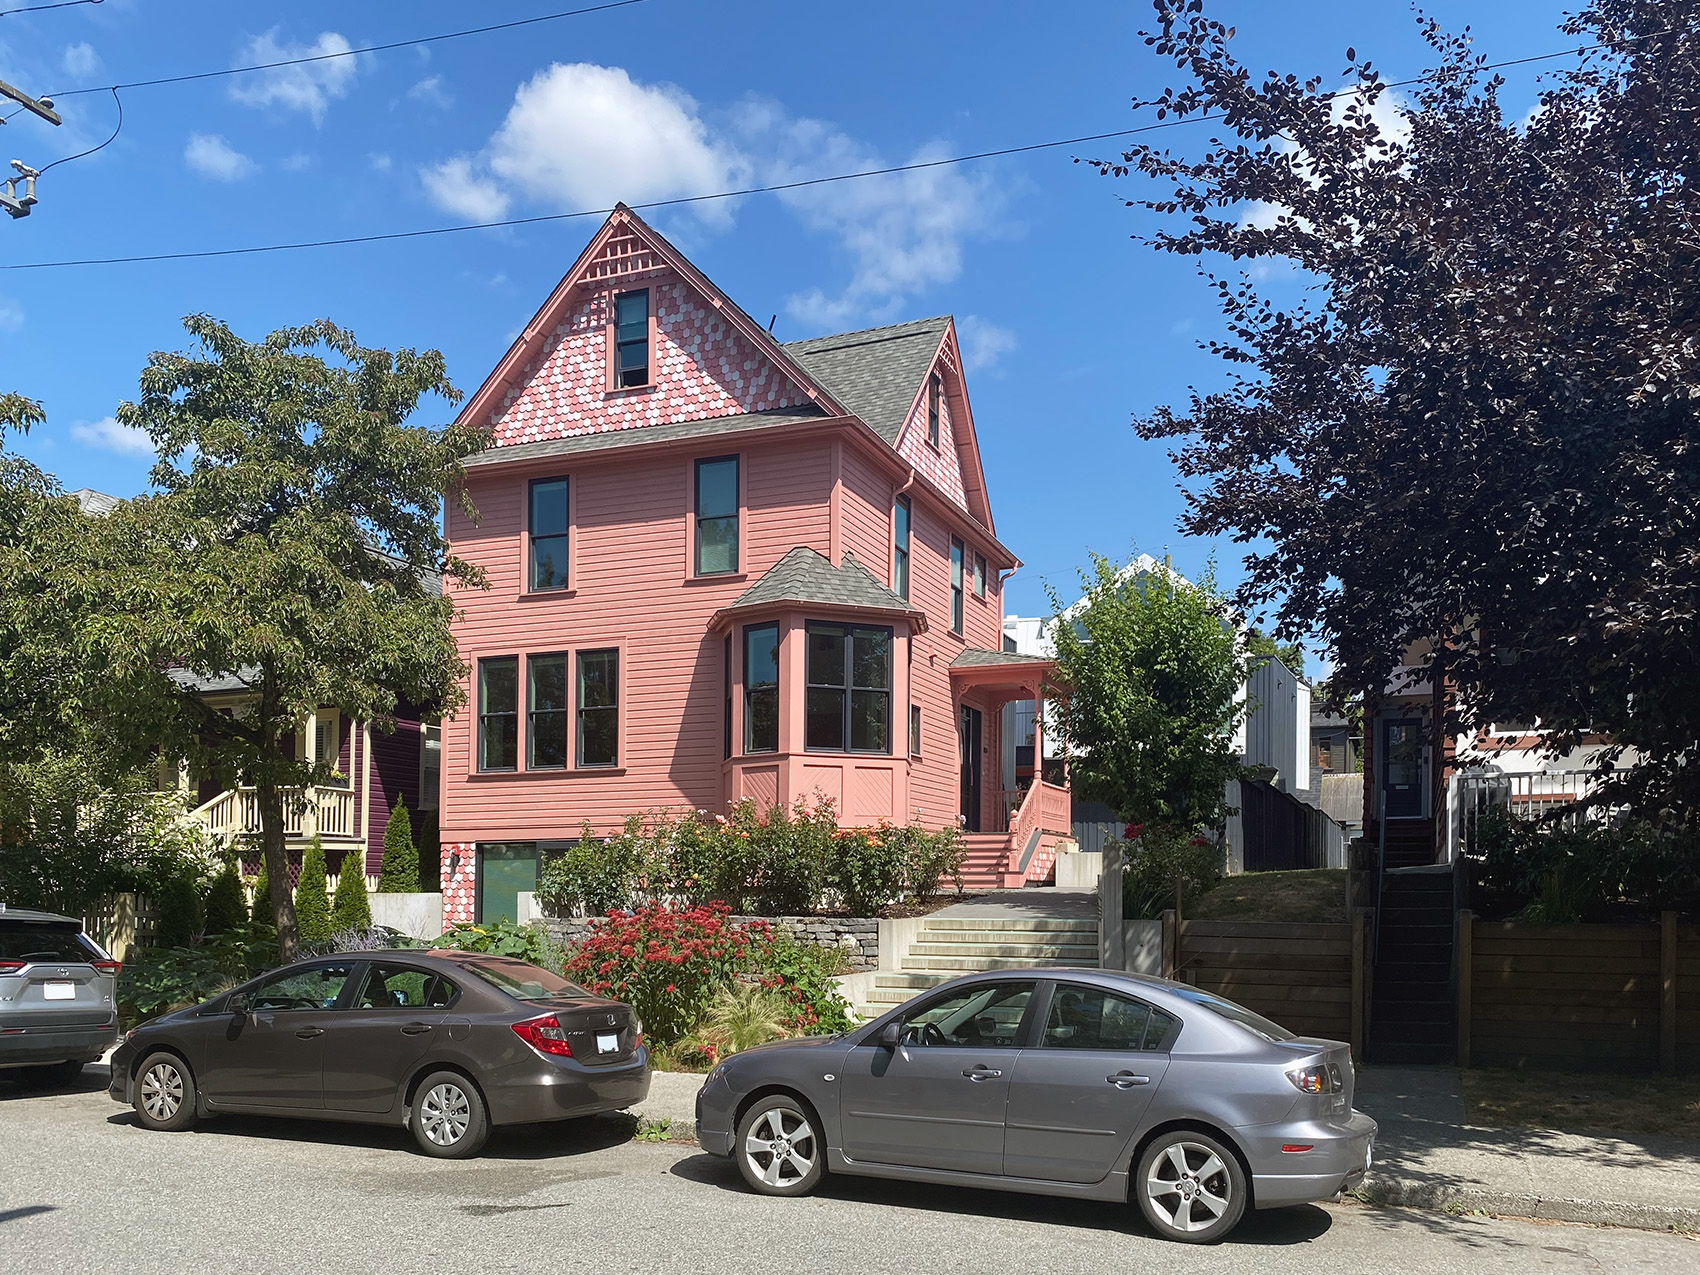 Pink House, 1900s/2020